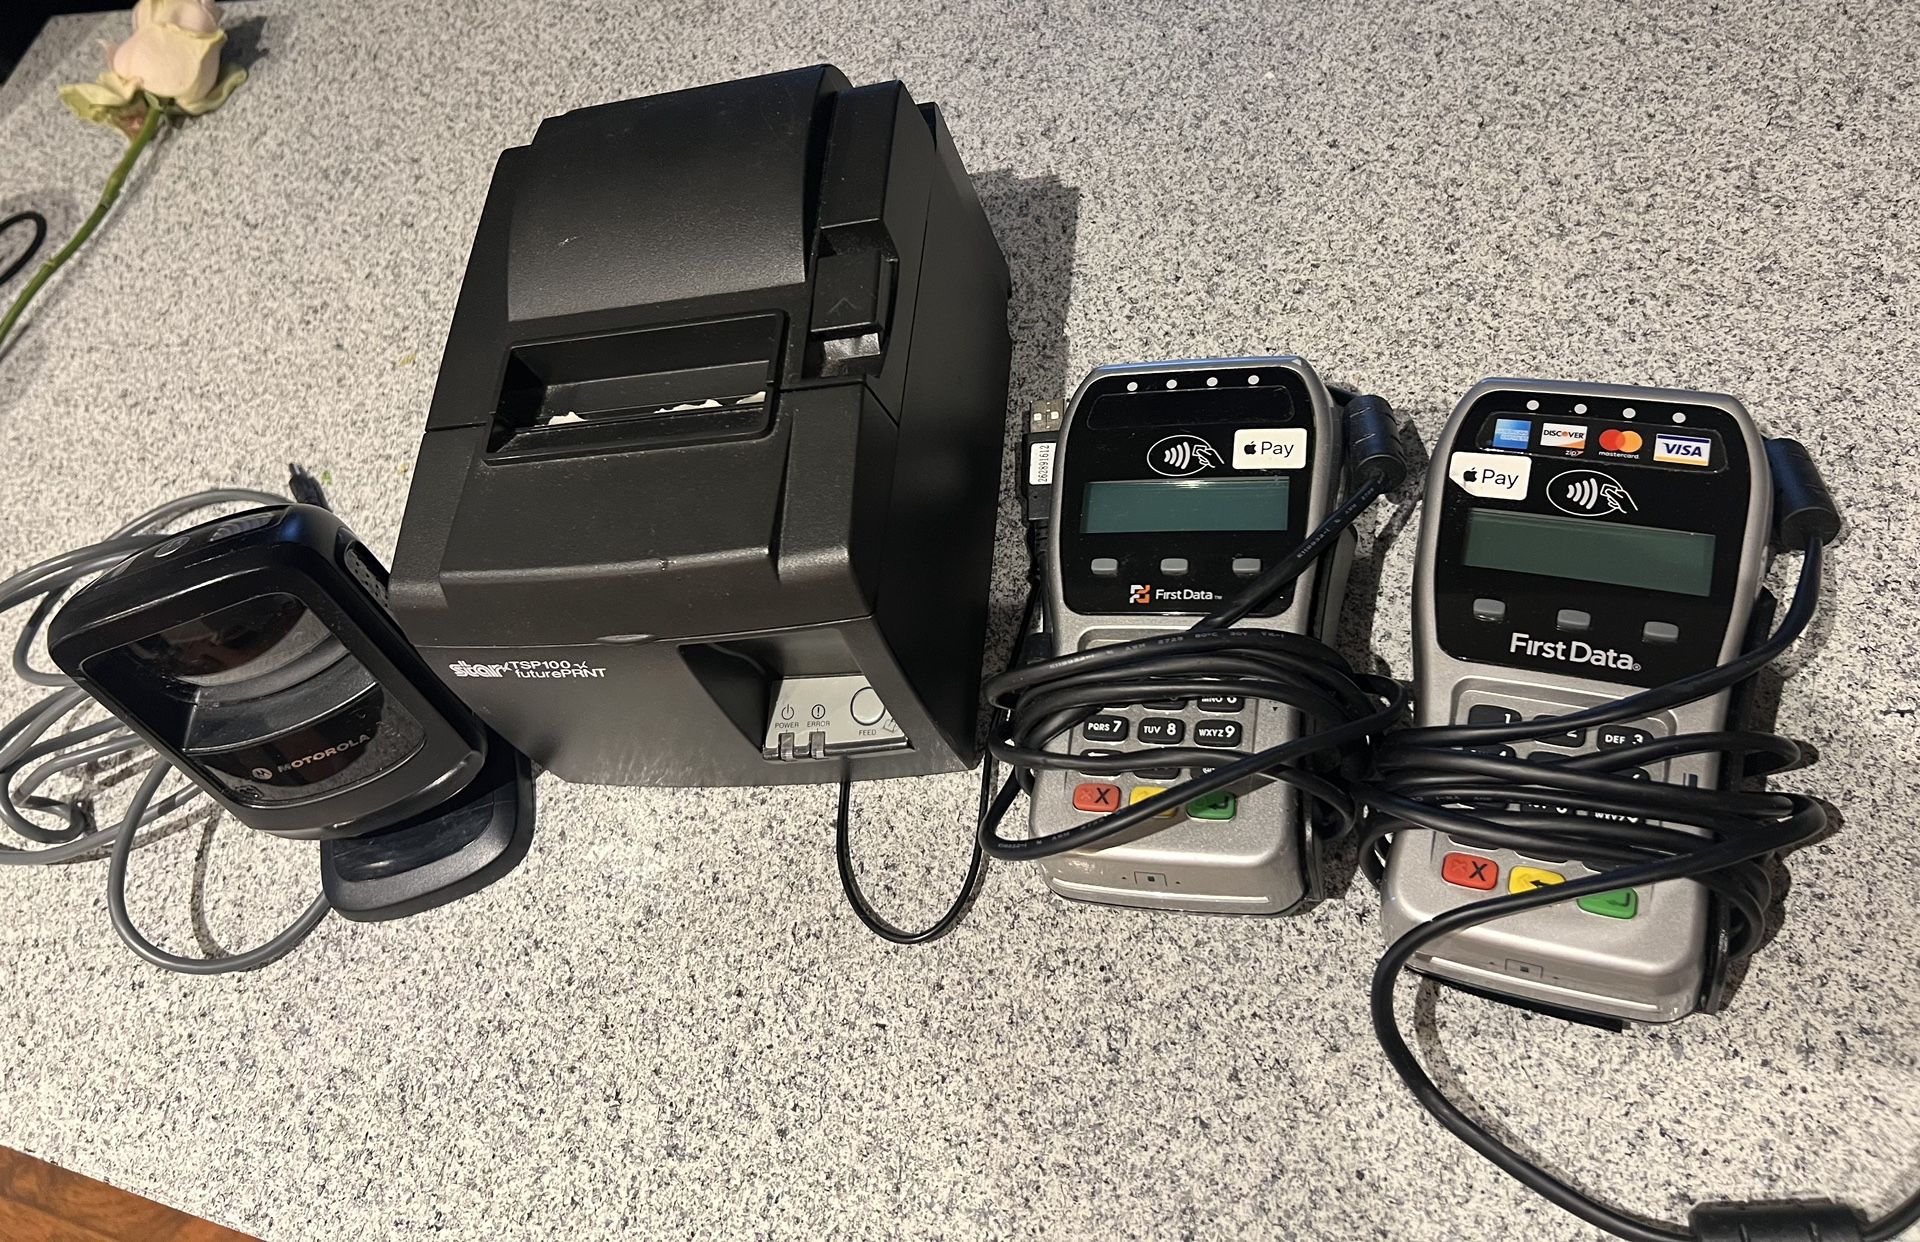 Receipt Printer Scanner And 2x Pin pads 